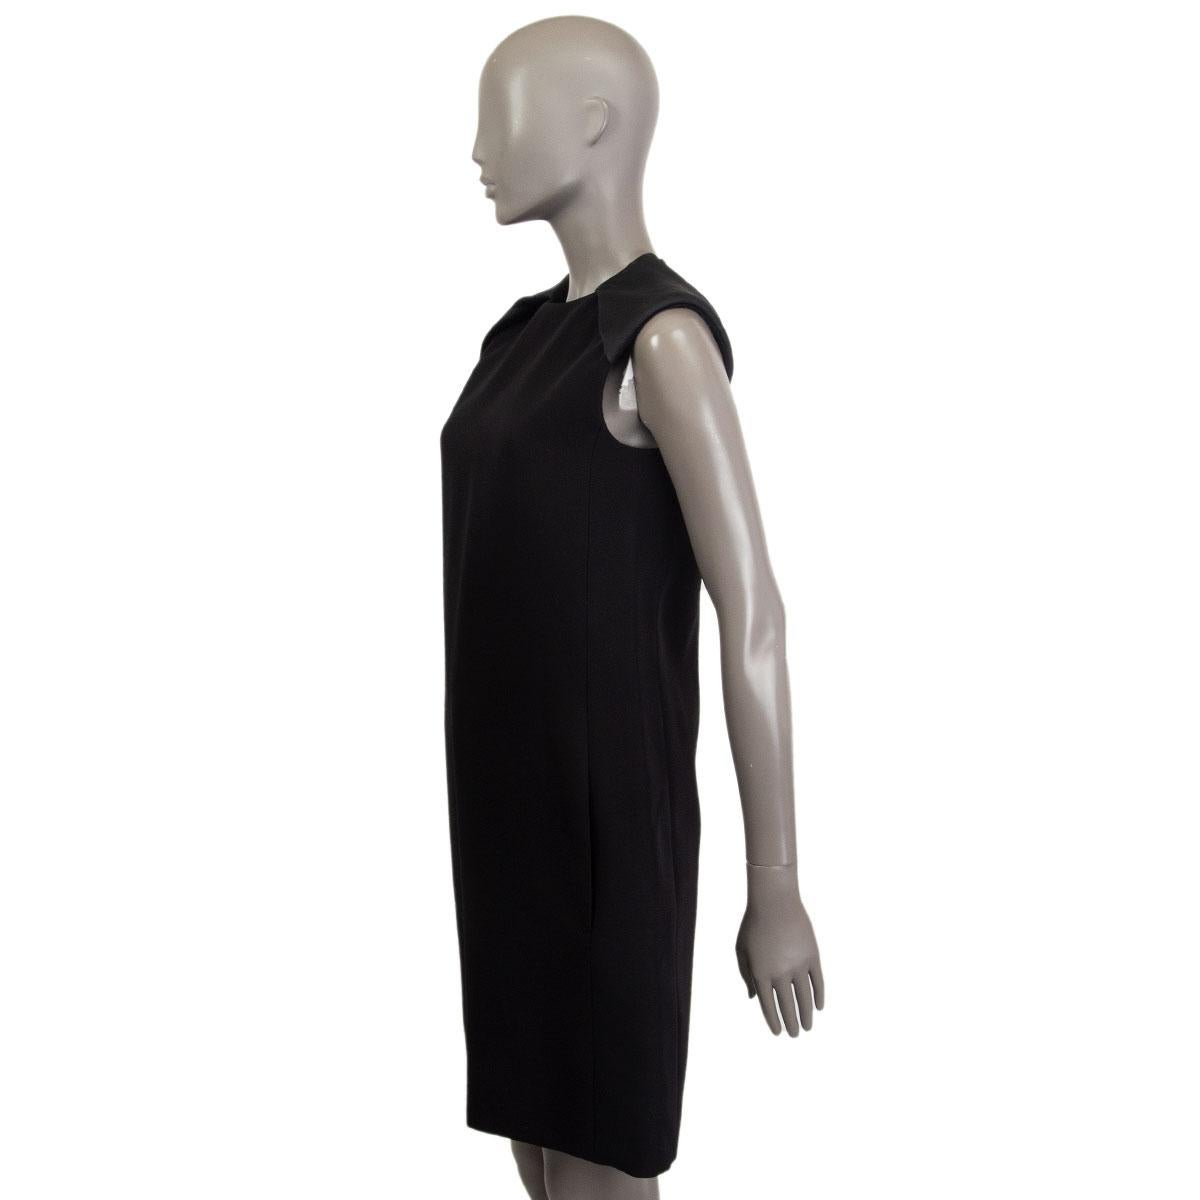 100% authentic Celine sleeveless A-Line dress in black wool (59%) and viscose (41%) with padded shoulders in black silk (100%) and slit pockets. Closes with one hook and a zipper on the back. Lined in black silk (100%). Has been worn and is in